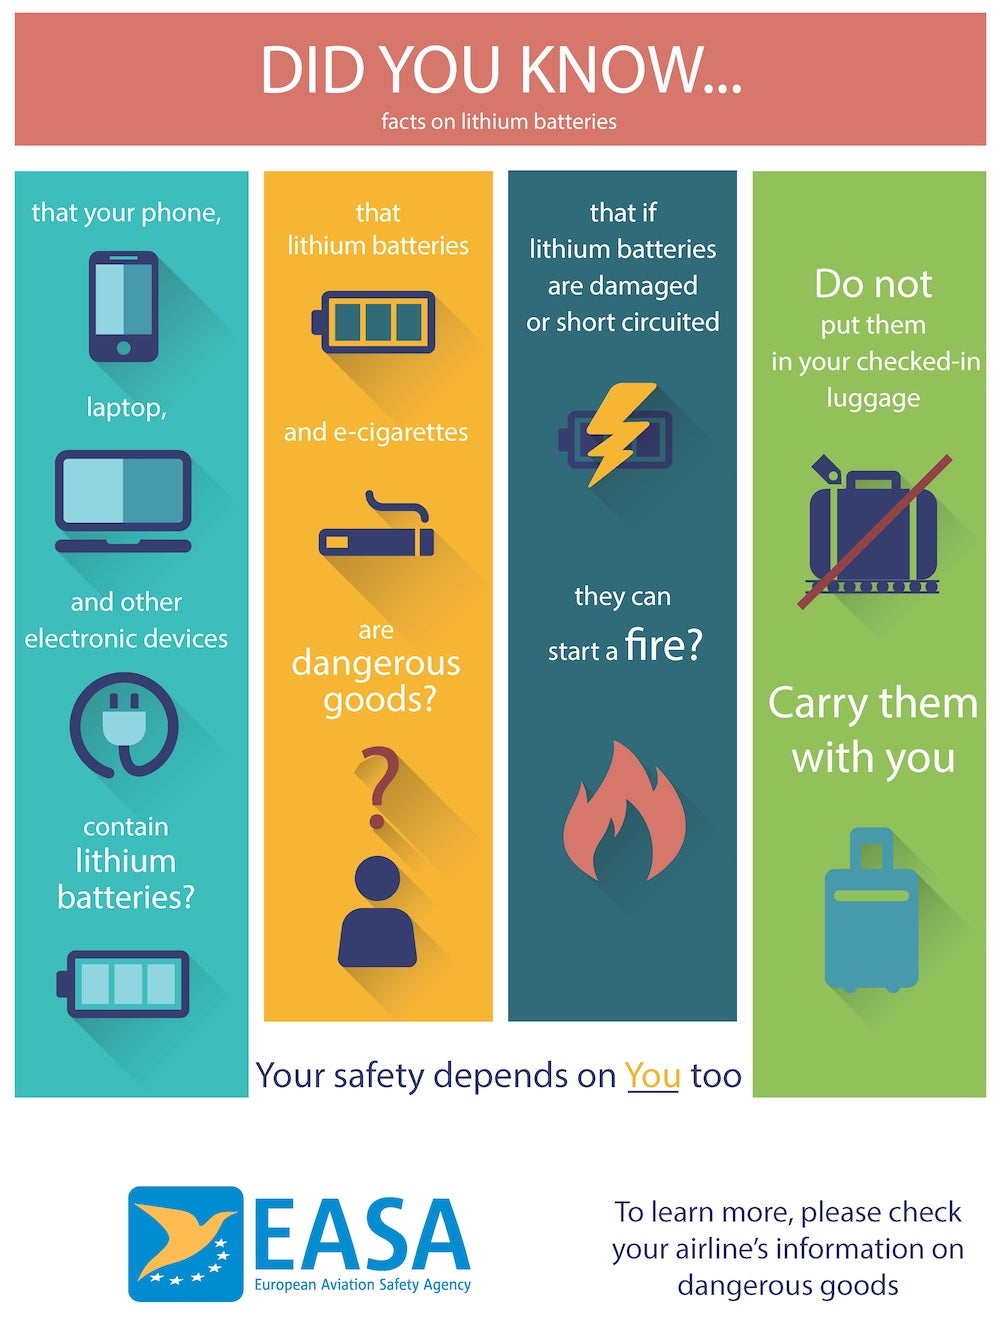 Infographic from the EASA giving guidance on lithium batteries